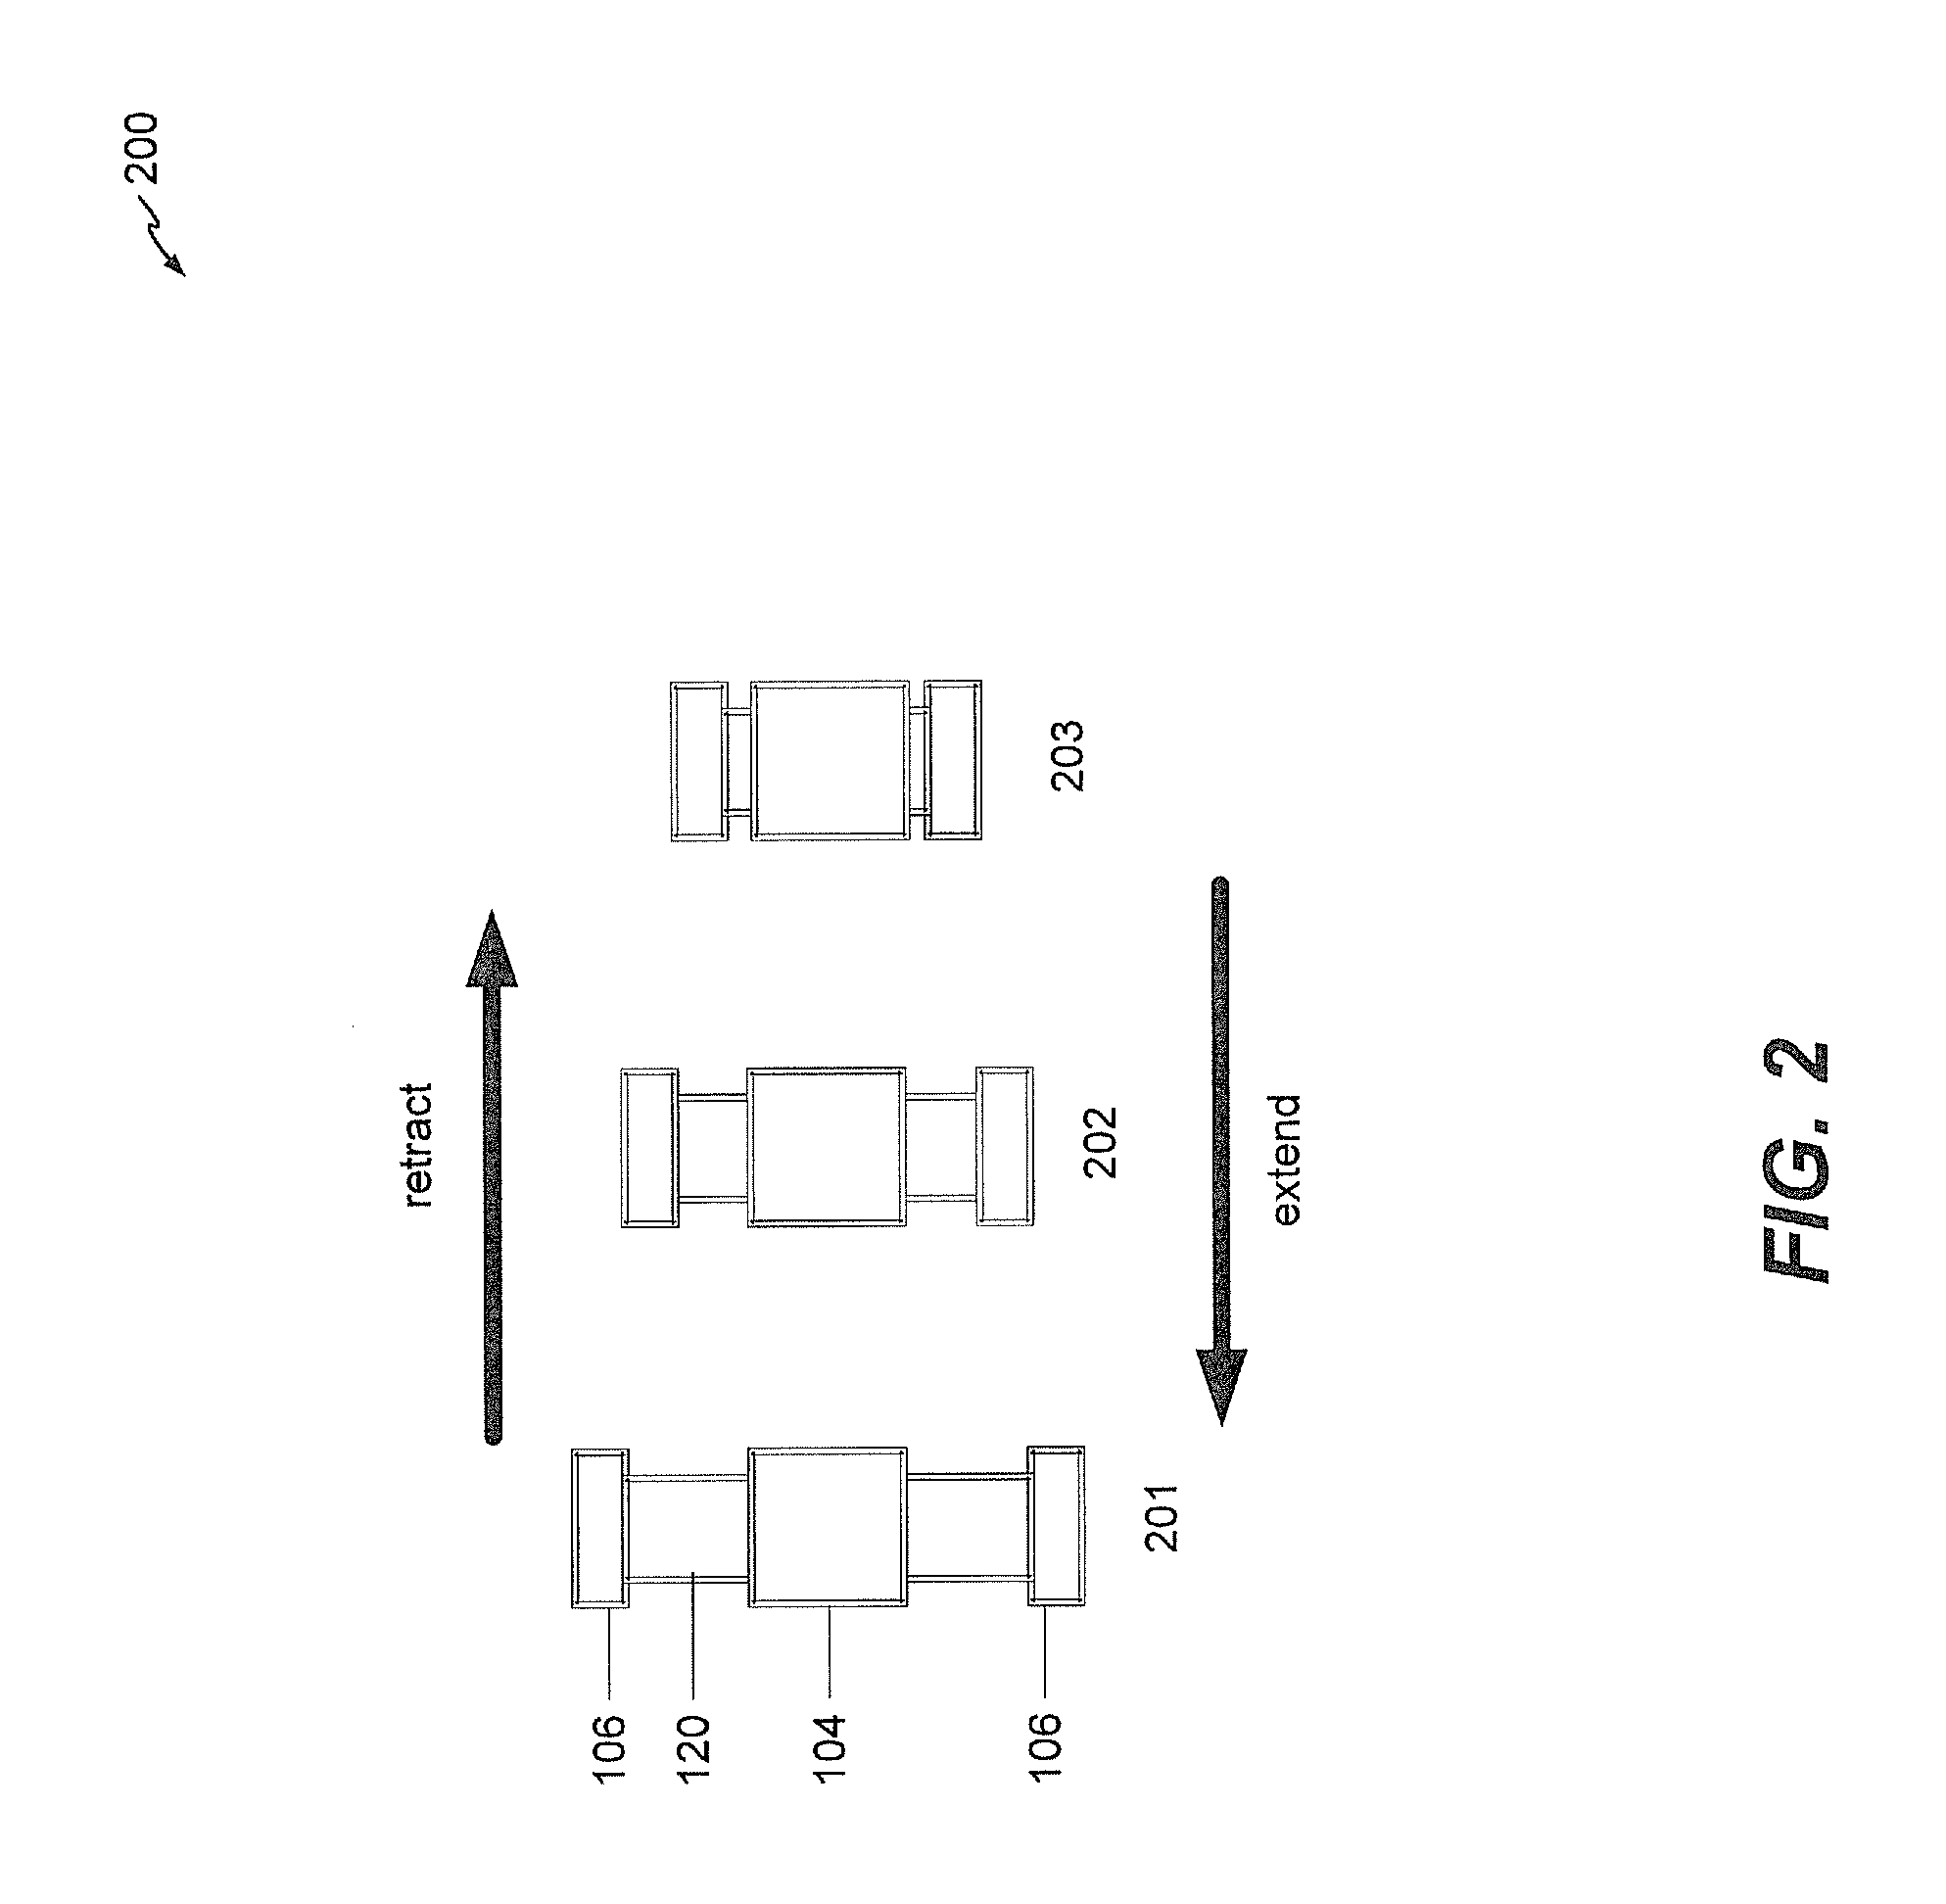 Retractable interconnect device configured to switch between electrical paths